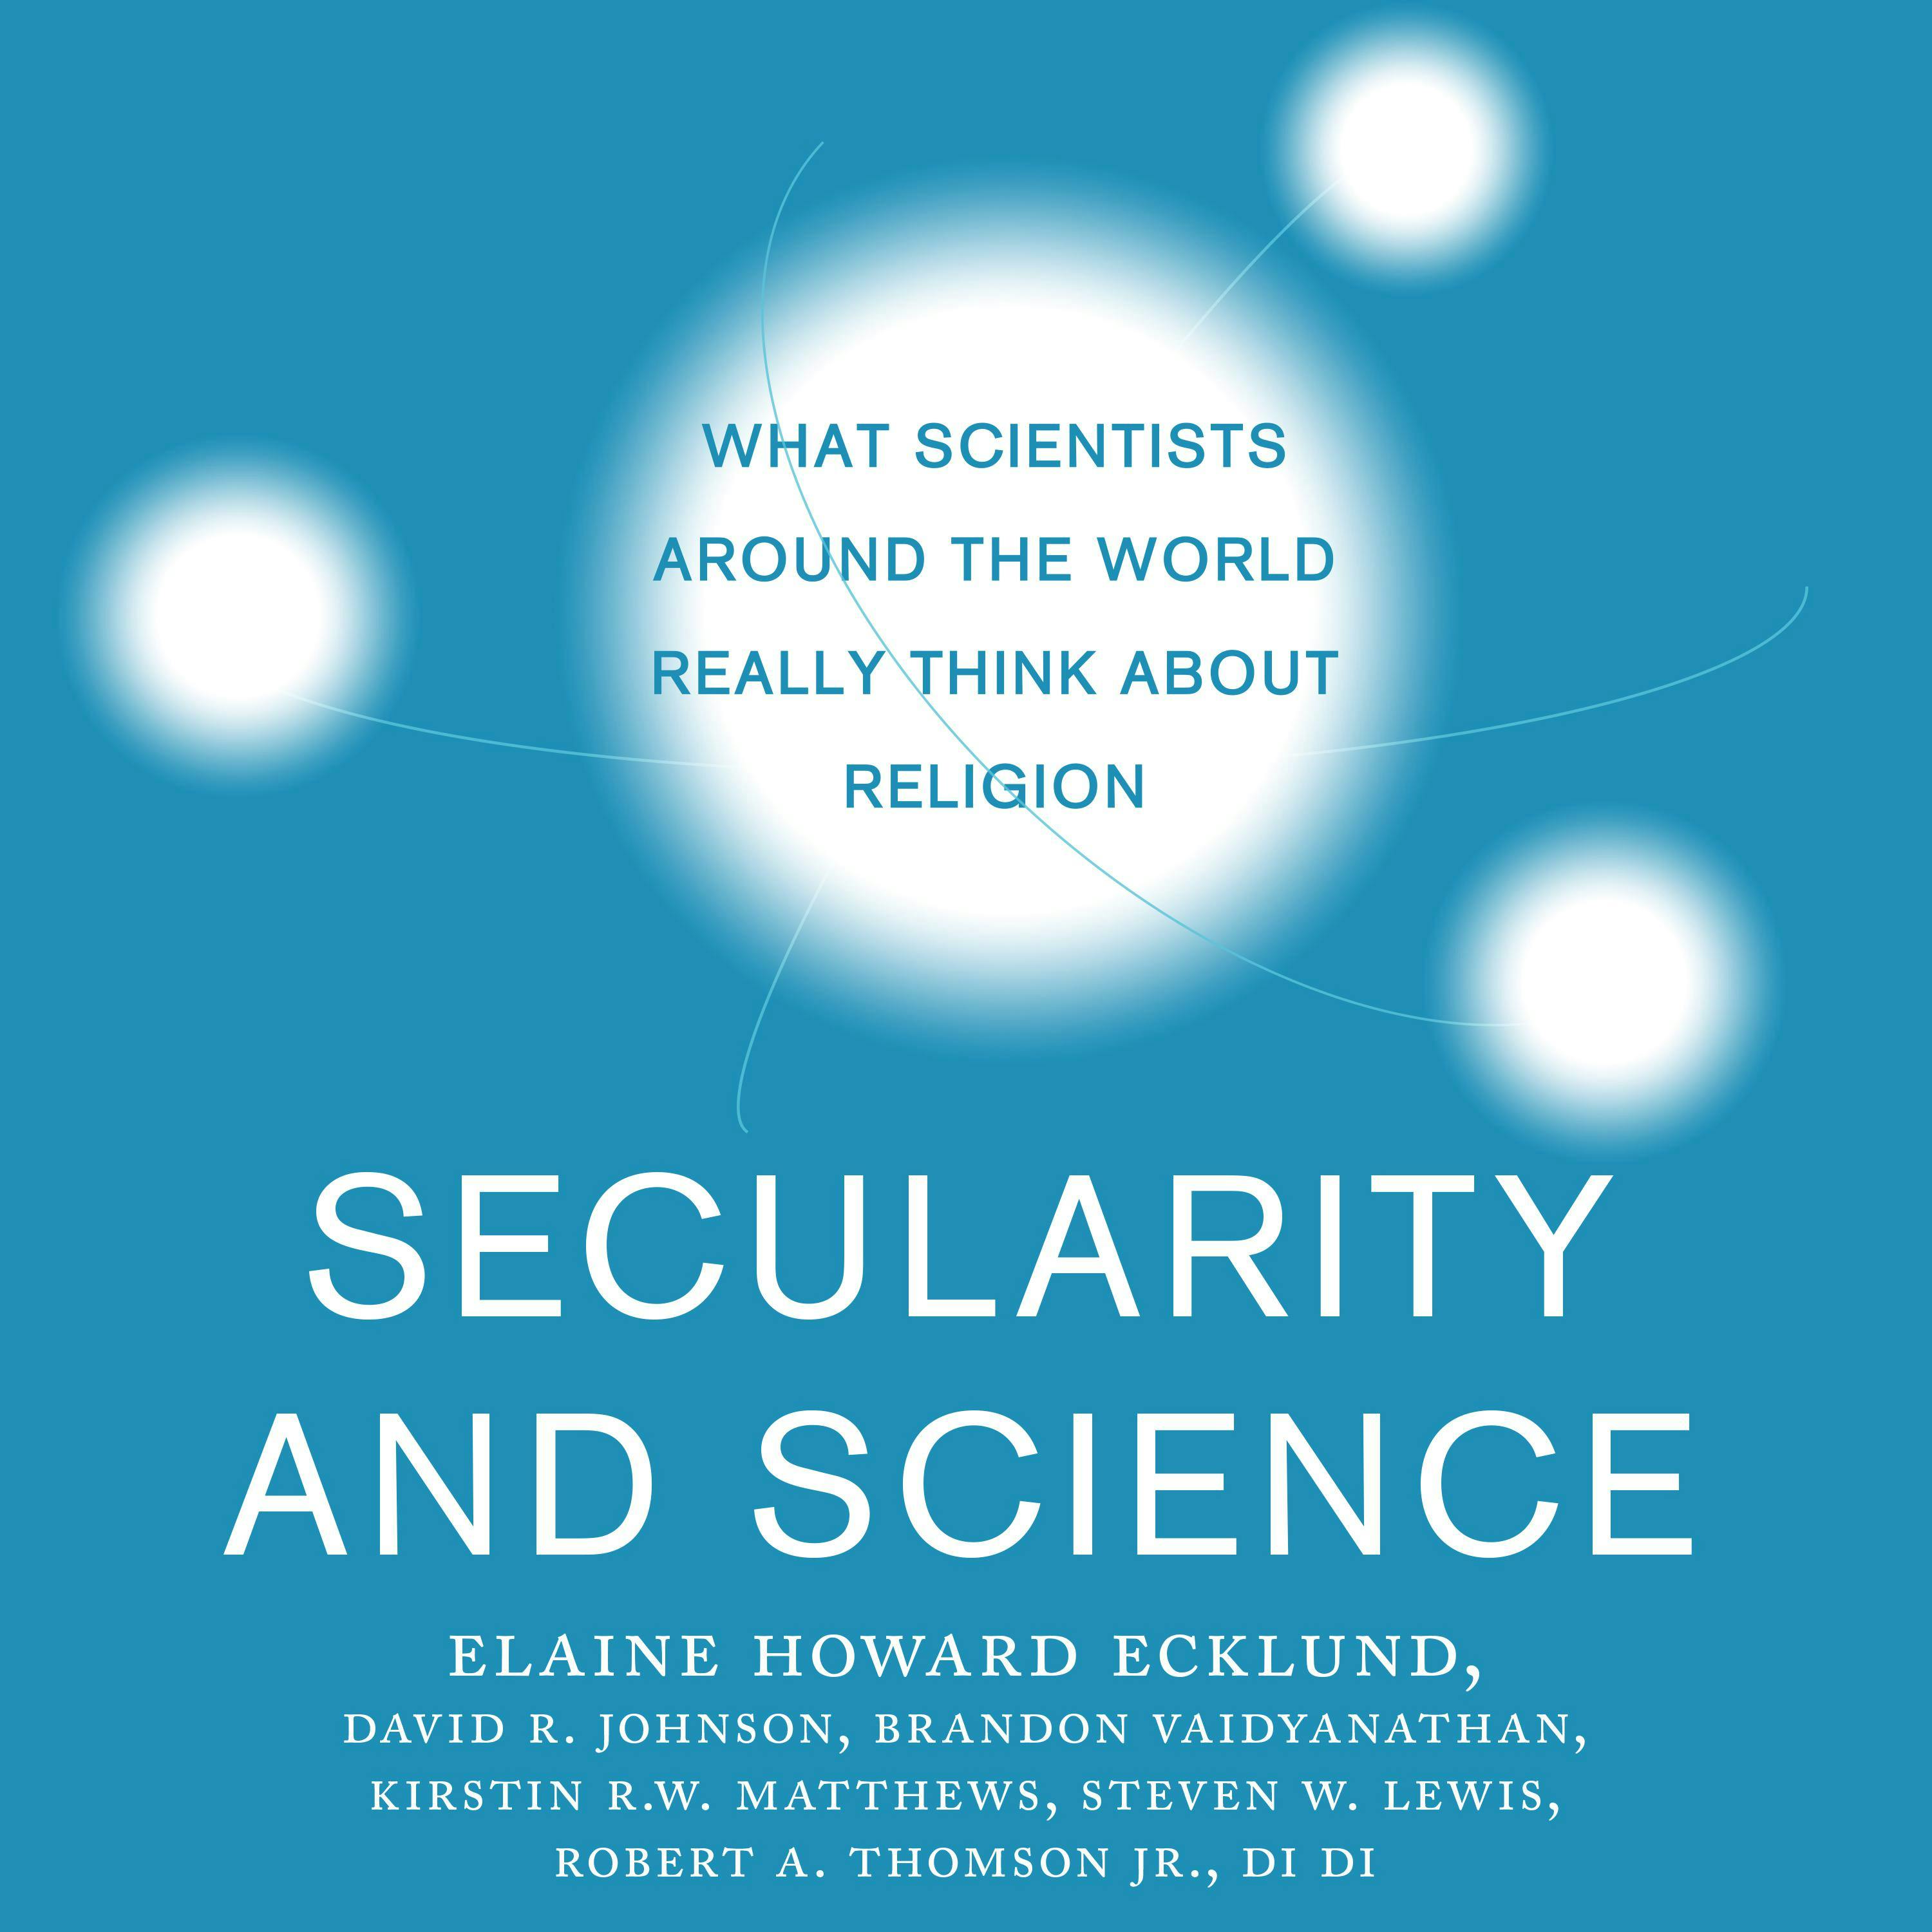 Secularity and Science: What Scientists Around the World Really Think About Religion - Jr., Steven W. Lewis, Brandon Vaidyanathan, Elaine Howard Ecklund, Kirstin R.W. Matthews, David R. Johnson, Di Di